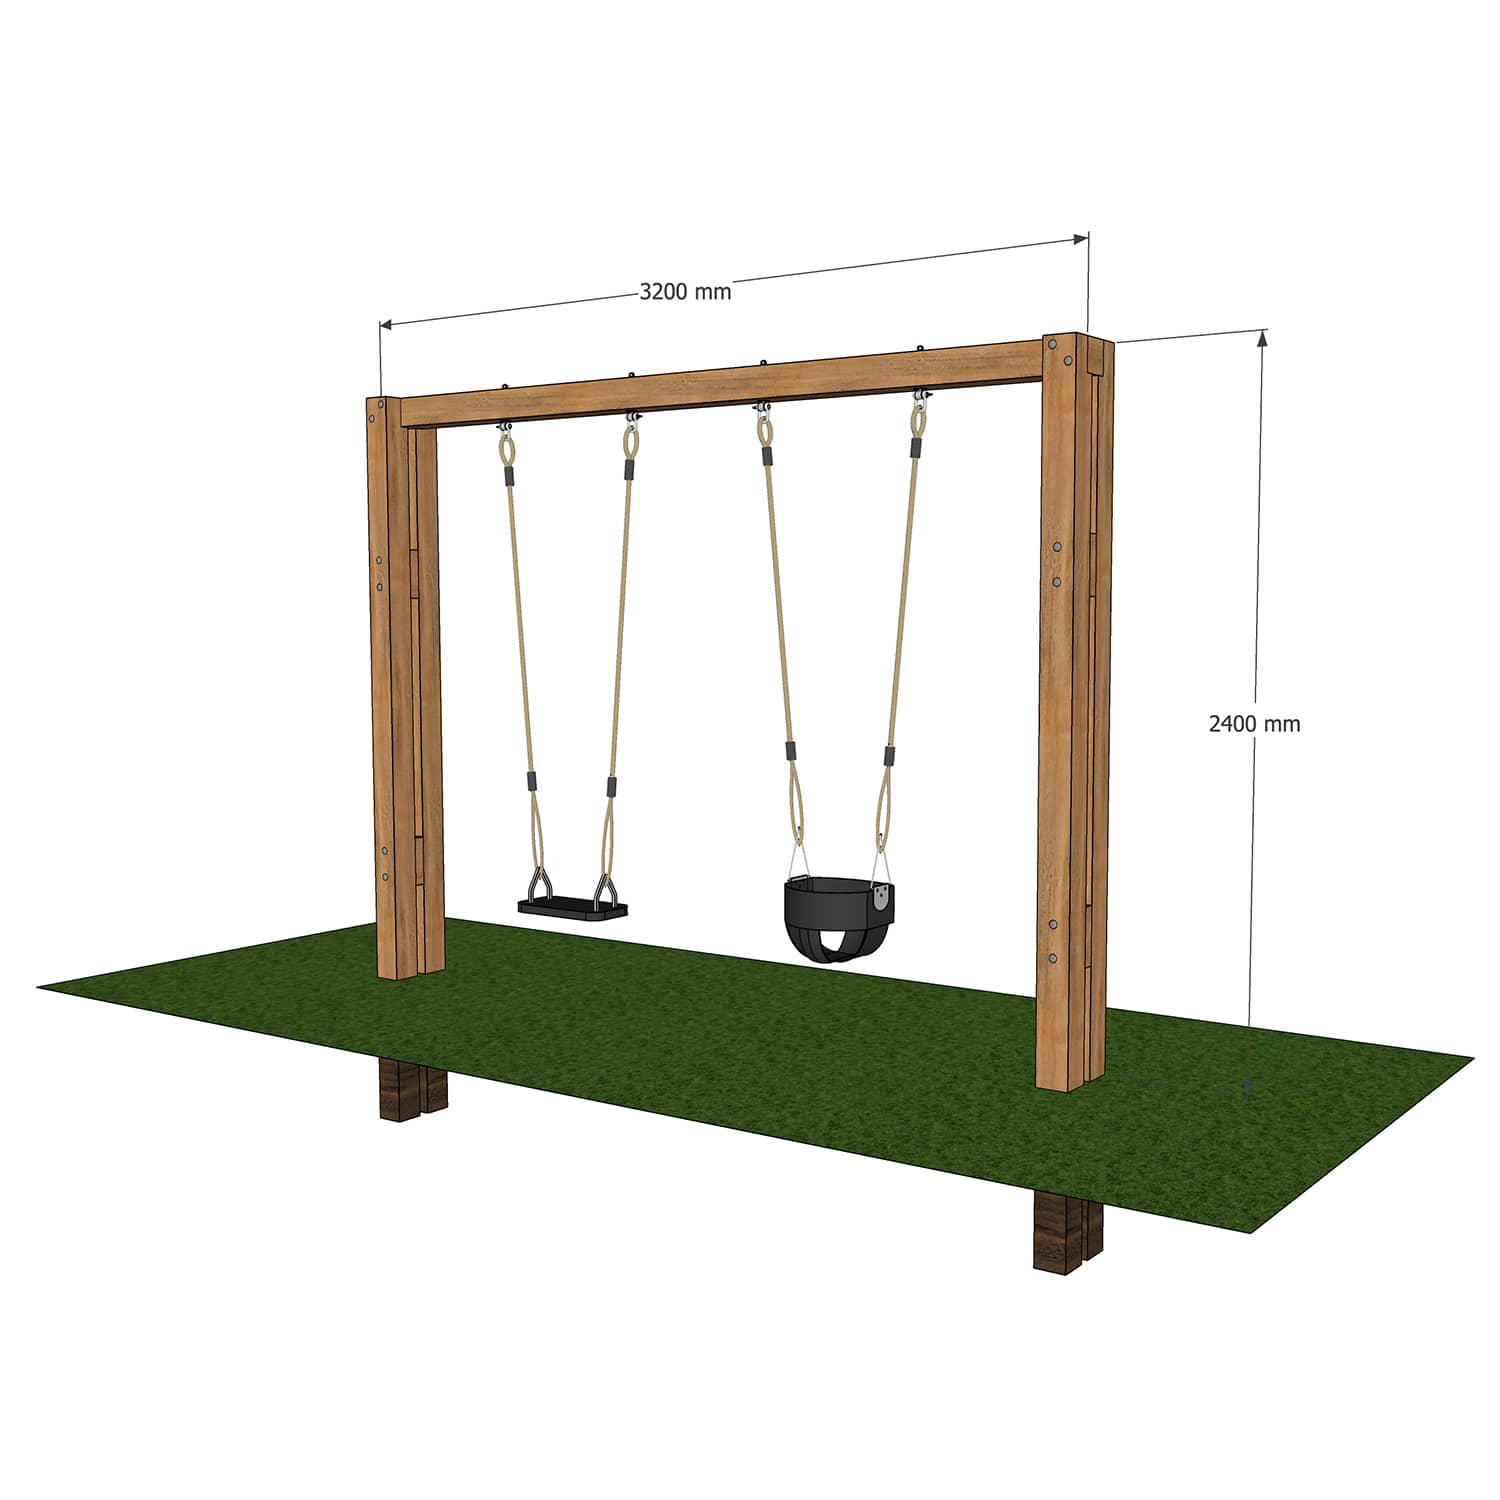 Kids swing set with 1 solid seat and 1 full bucket seat. Wooden swing set.